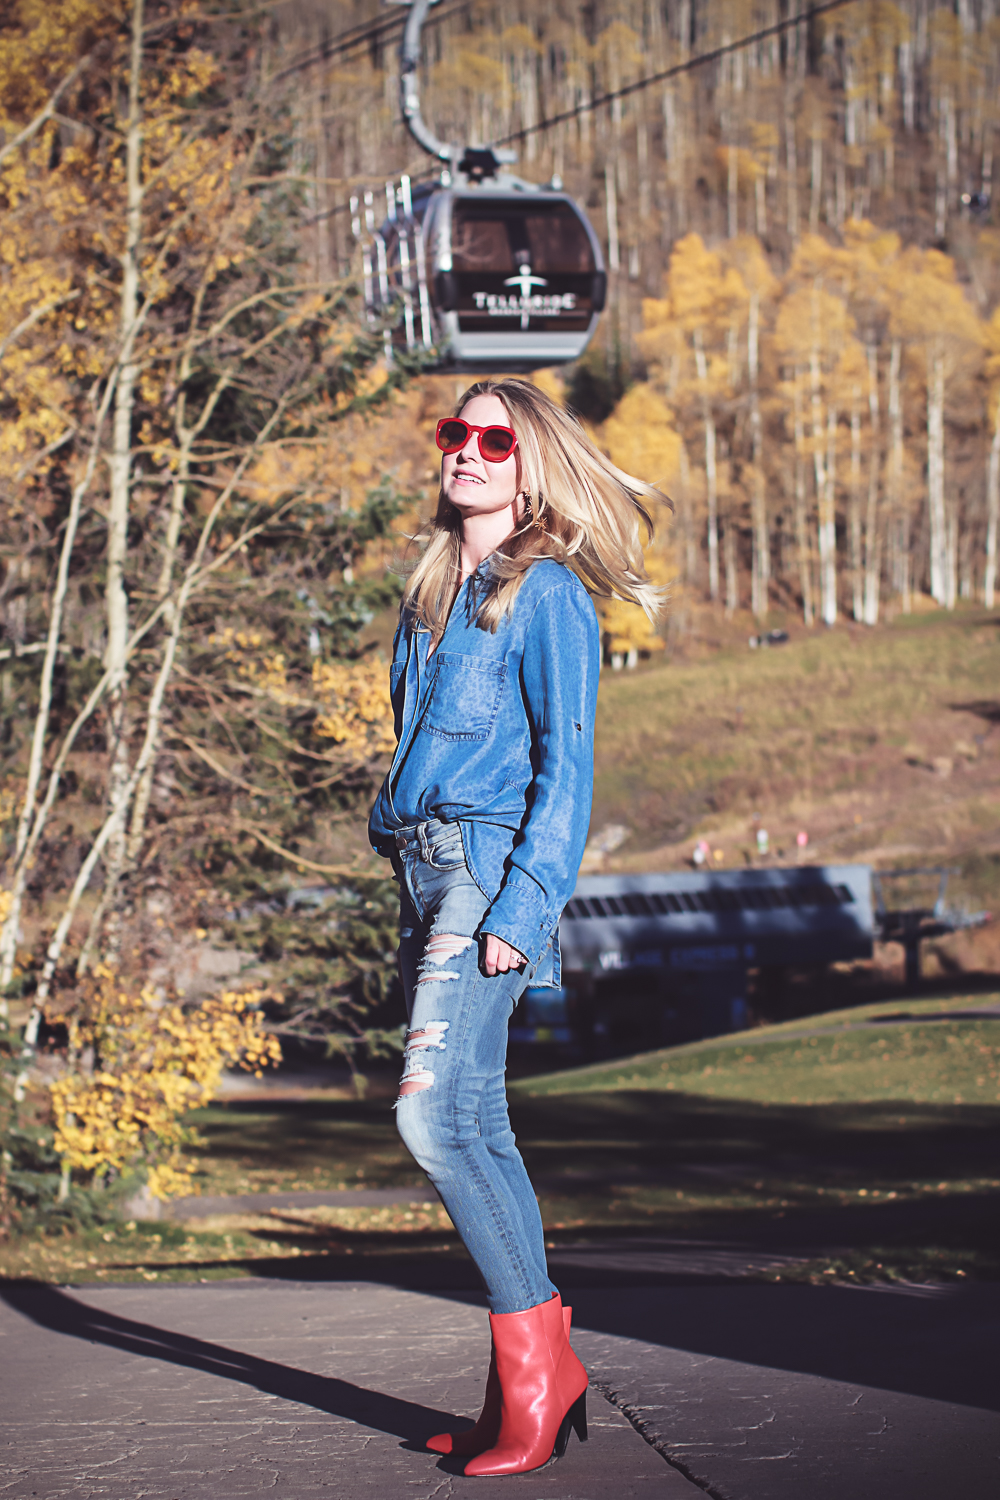 How to wear red boots, red booties by Dolce Vita with denim on denim look, on fashion blogger over 40, Erin Busbee of Busbee Style in Mountain Village, Colorado